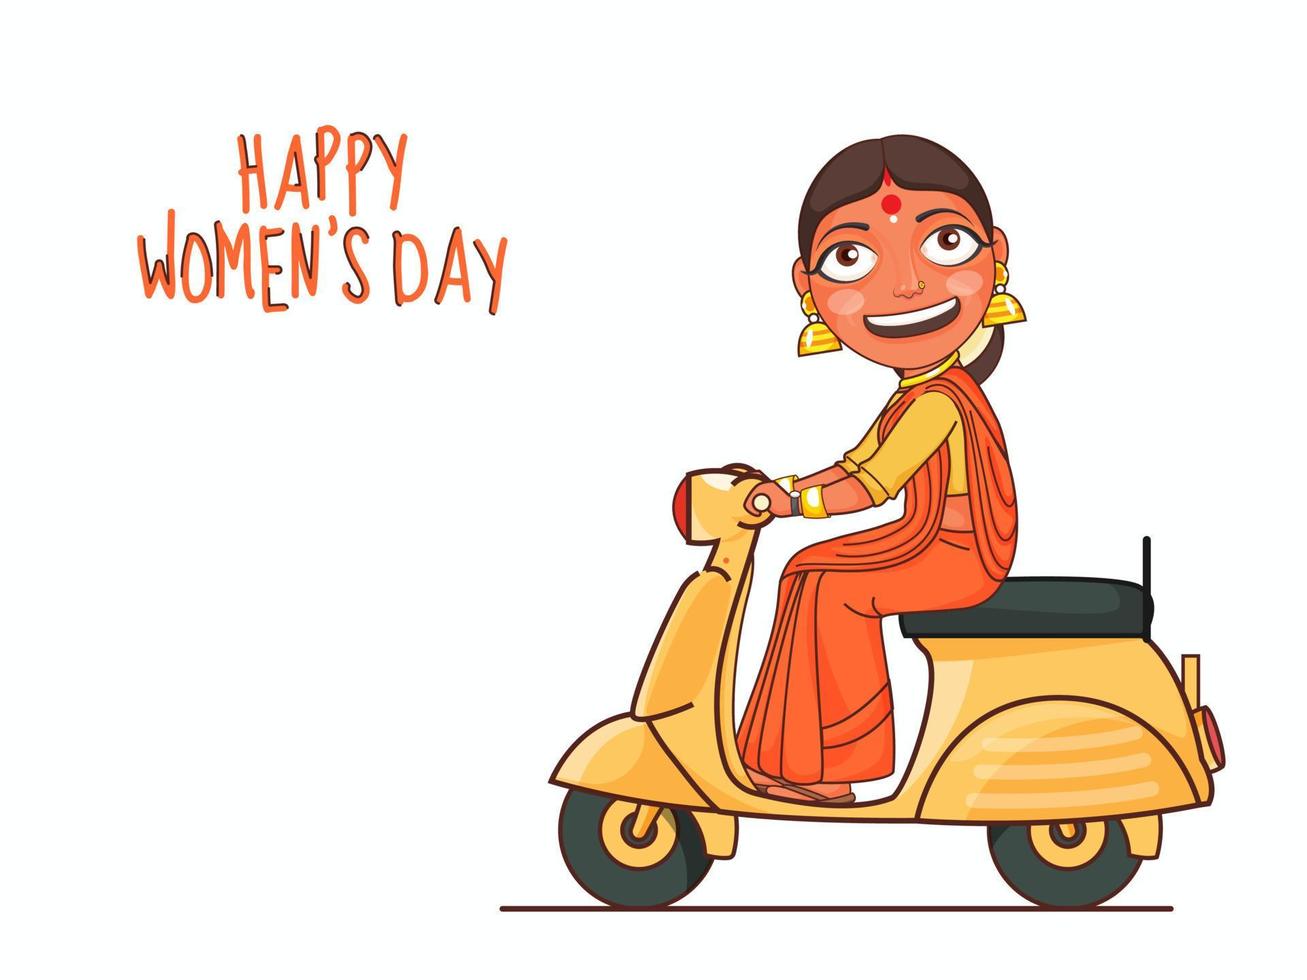 Indian Woman Driving Scooter on White Background for Happy Women's Day Celebration Concept. vector